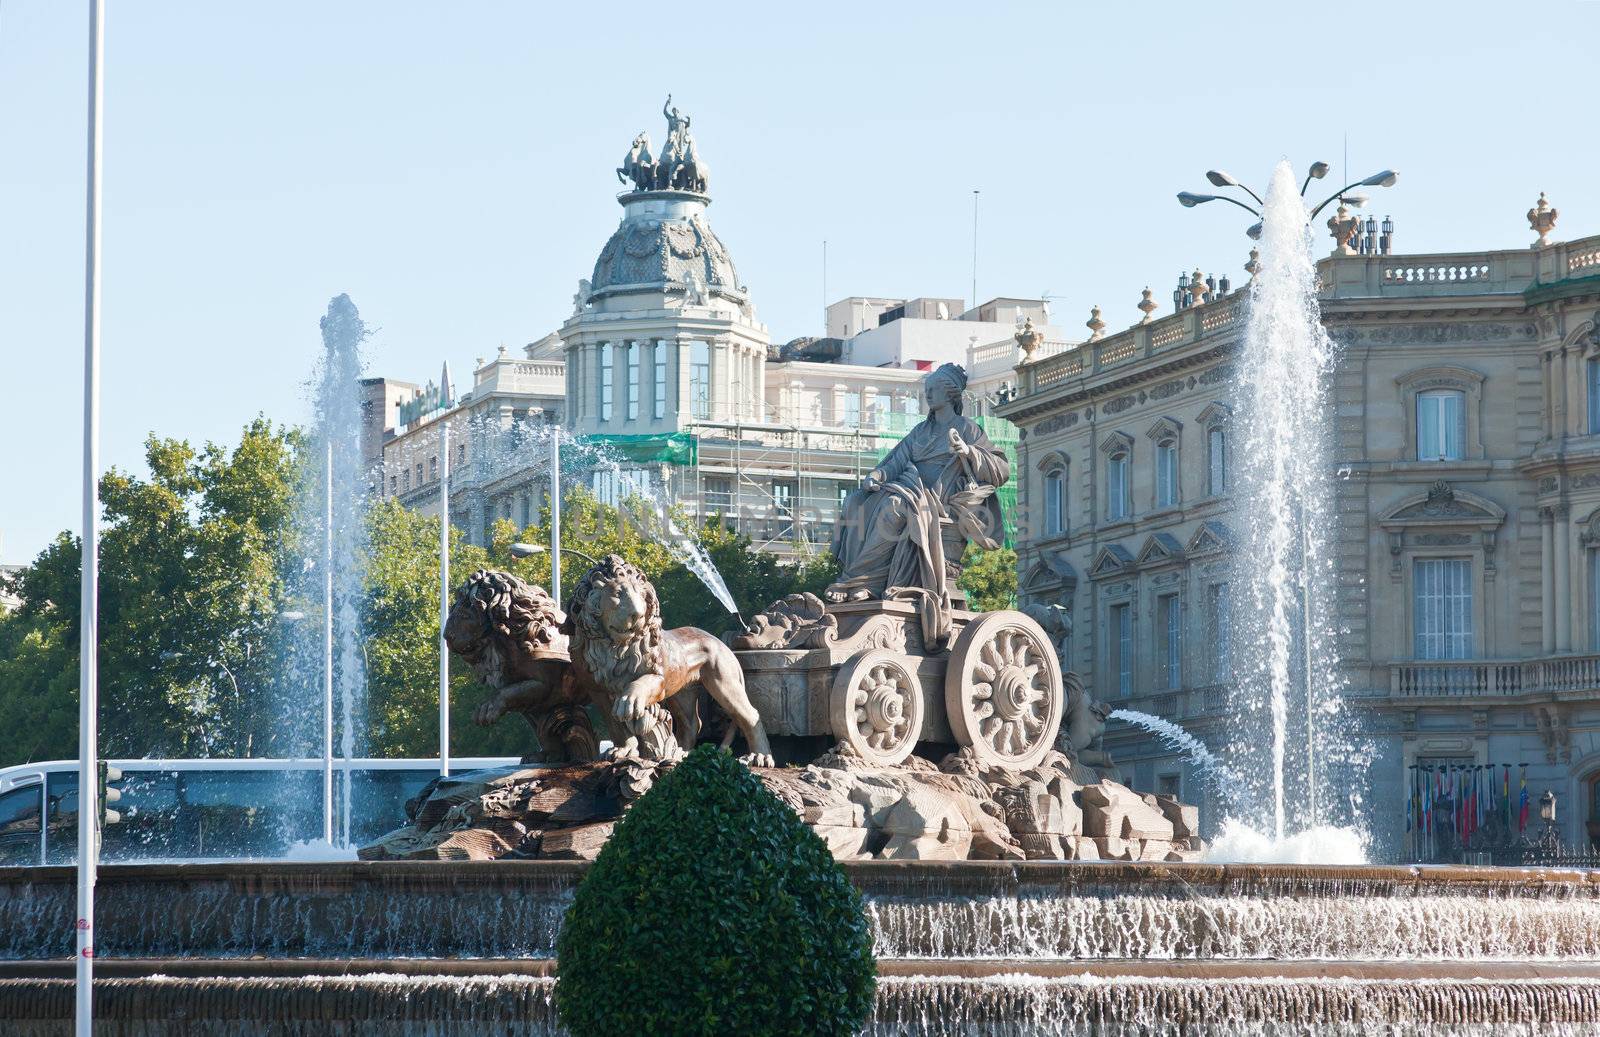 The famous Cibeles Fountain in Madrid by gary718